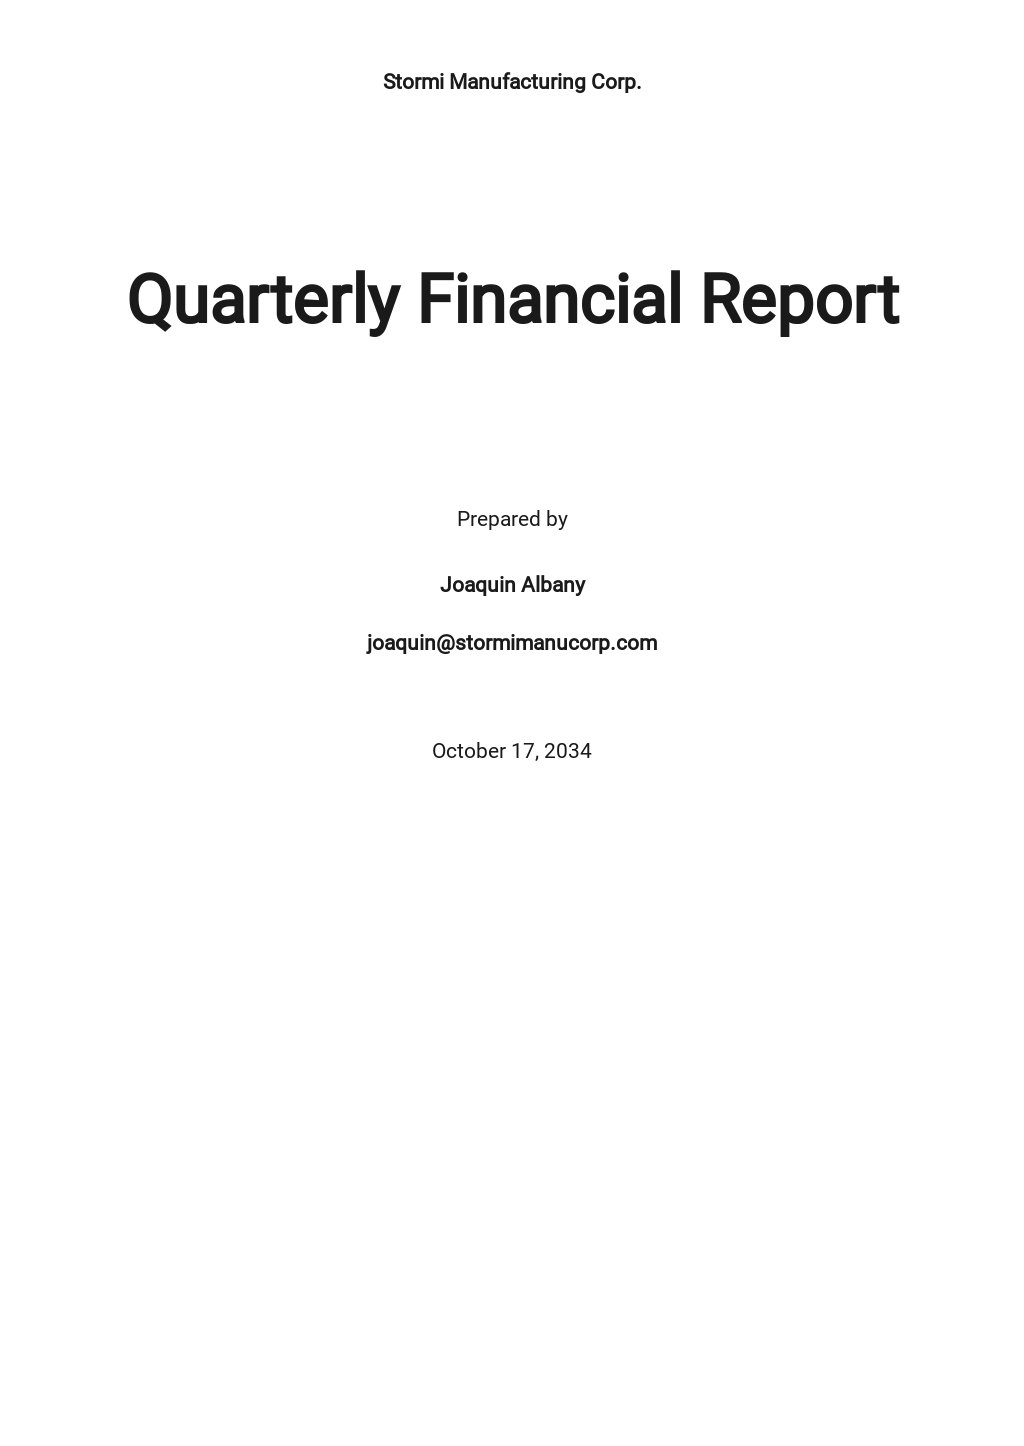 research report on finance topics